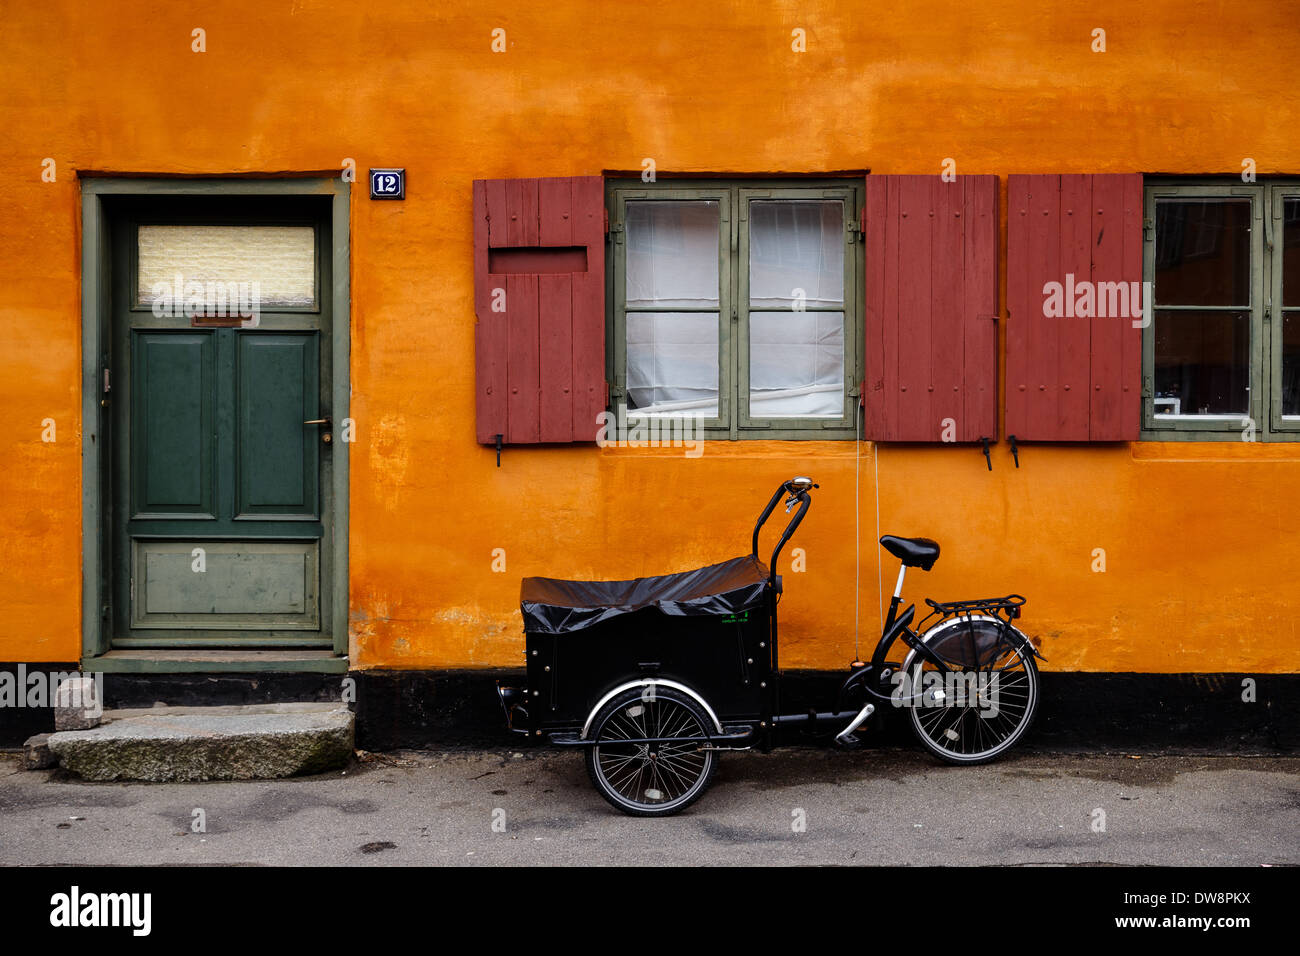 Photograph of a traditional danish bicycle standing in front of an orange house in Copenhagen. Stock Photo